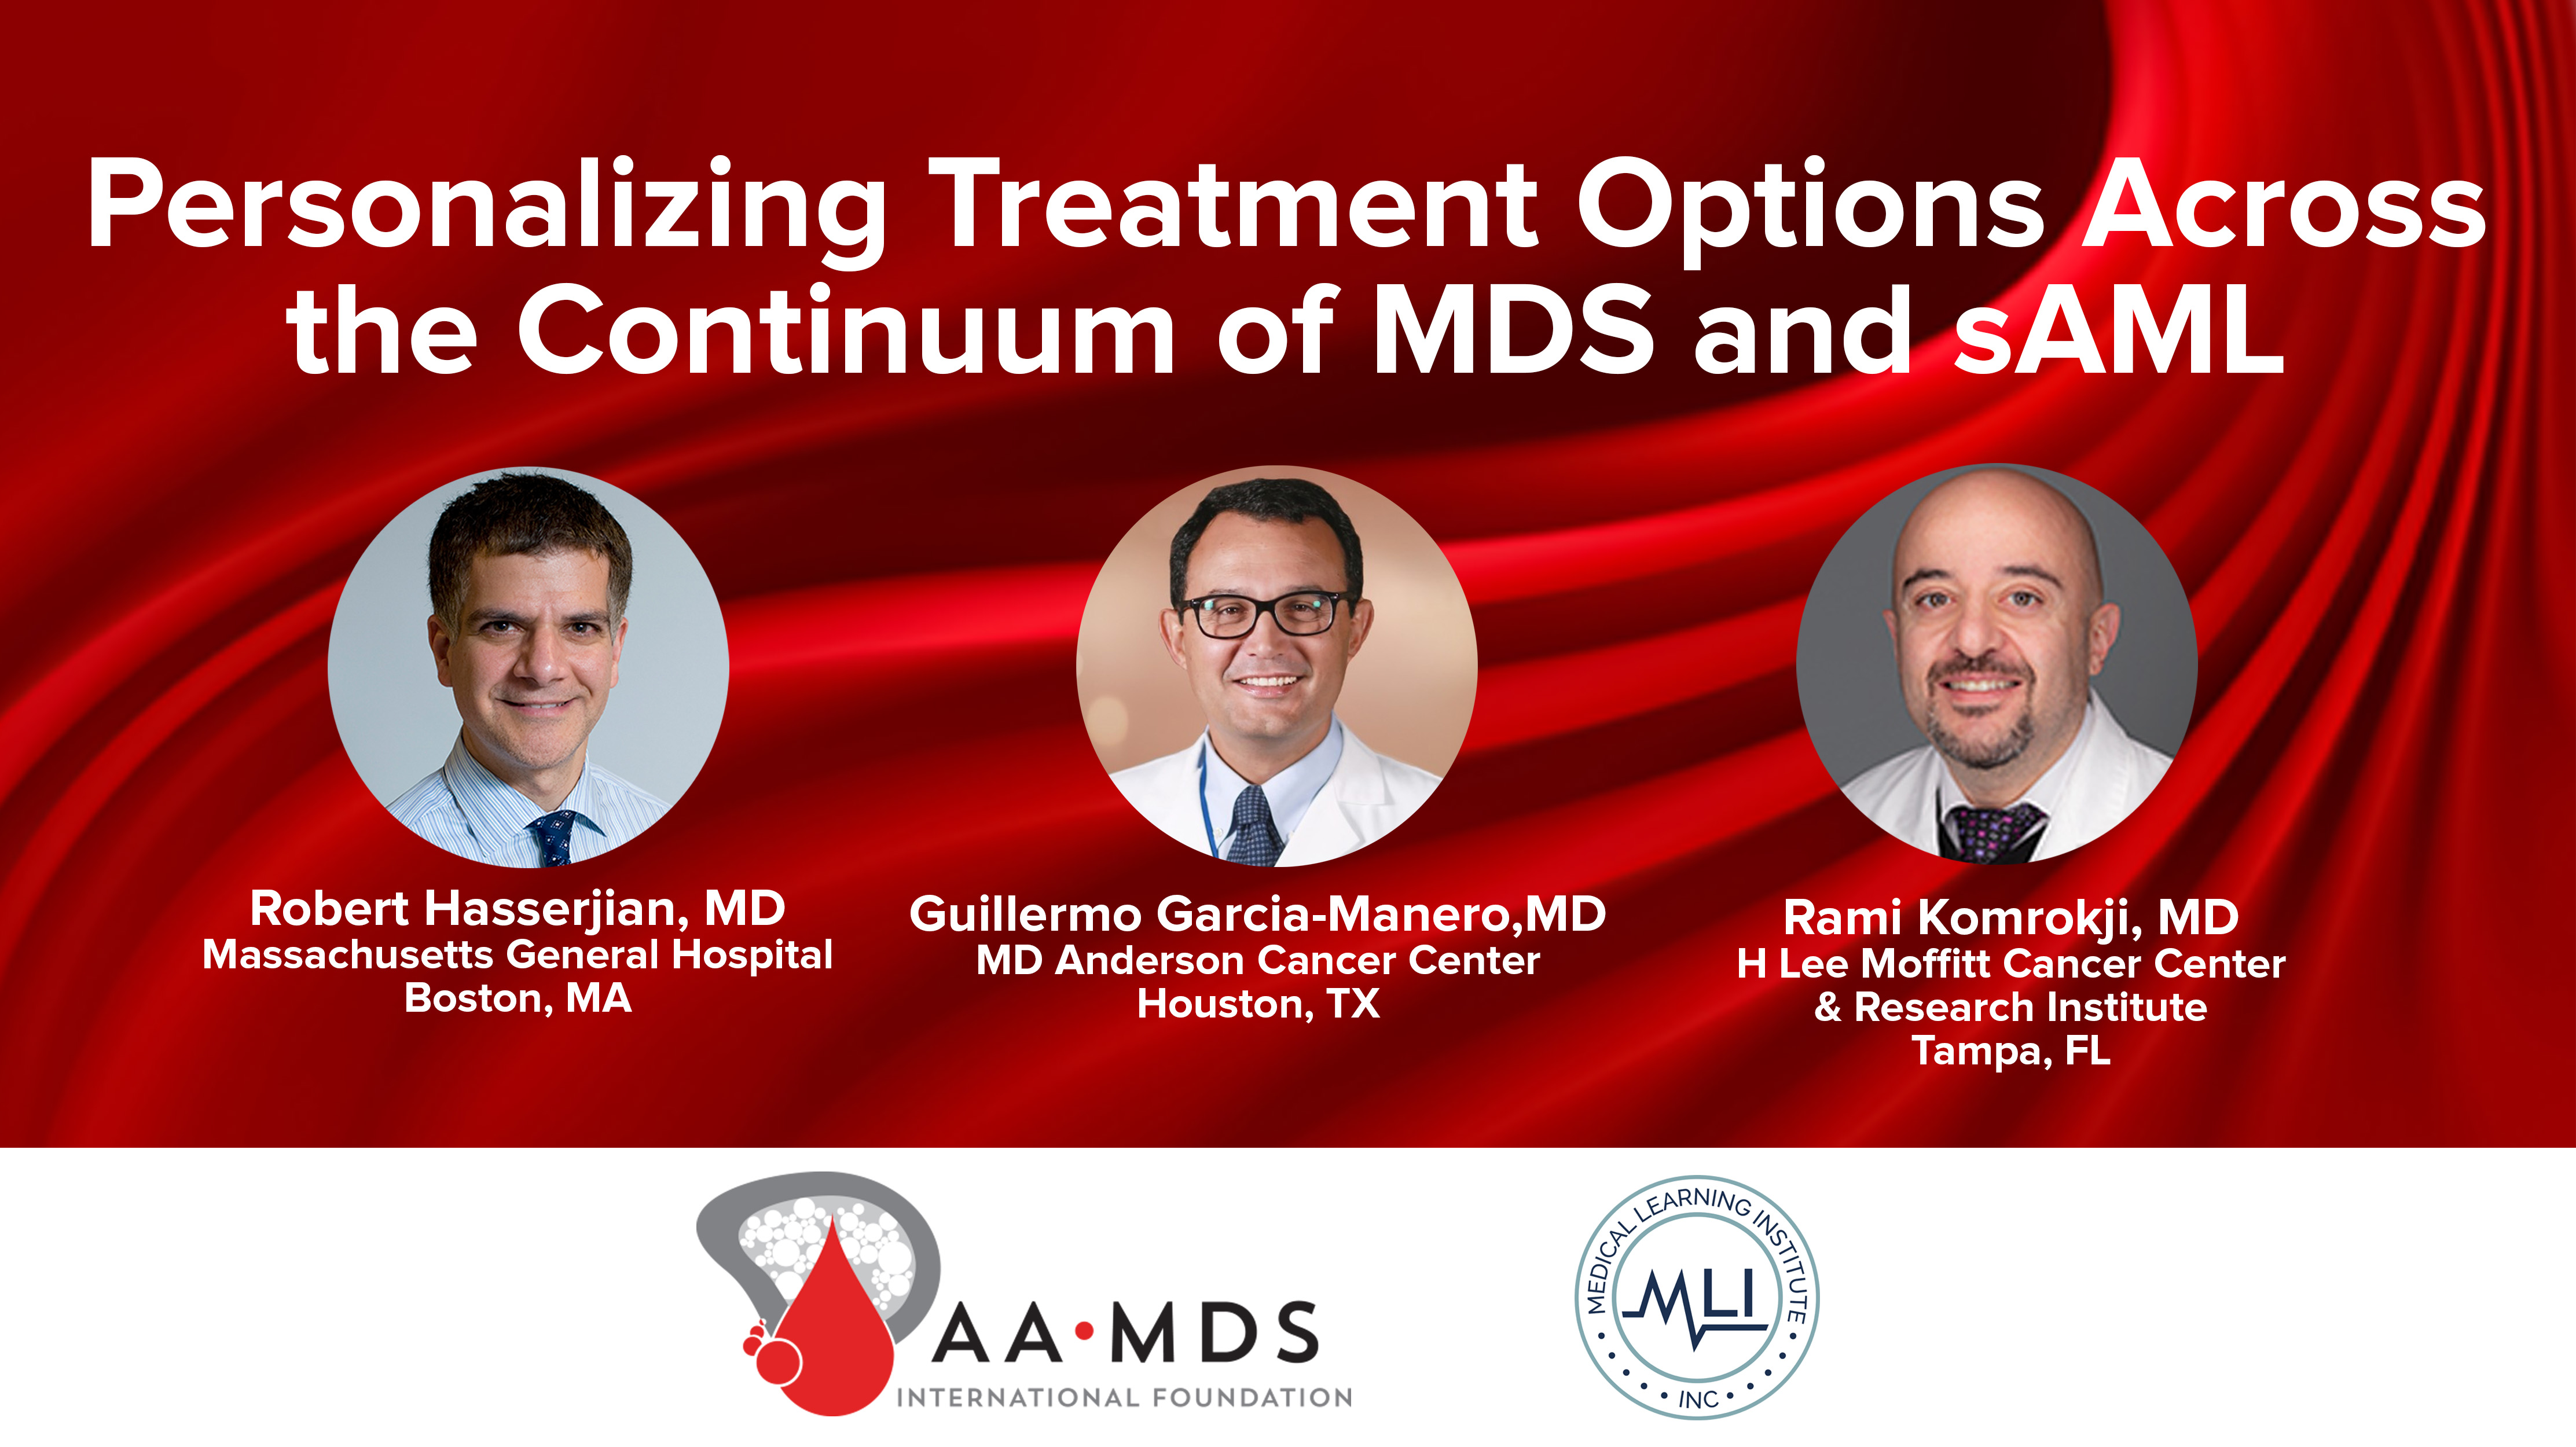 Personalizing Treatment Options Across the Continuum of MDS and sAML